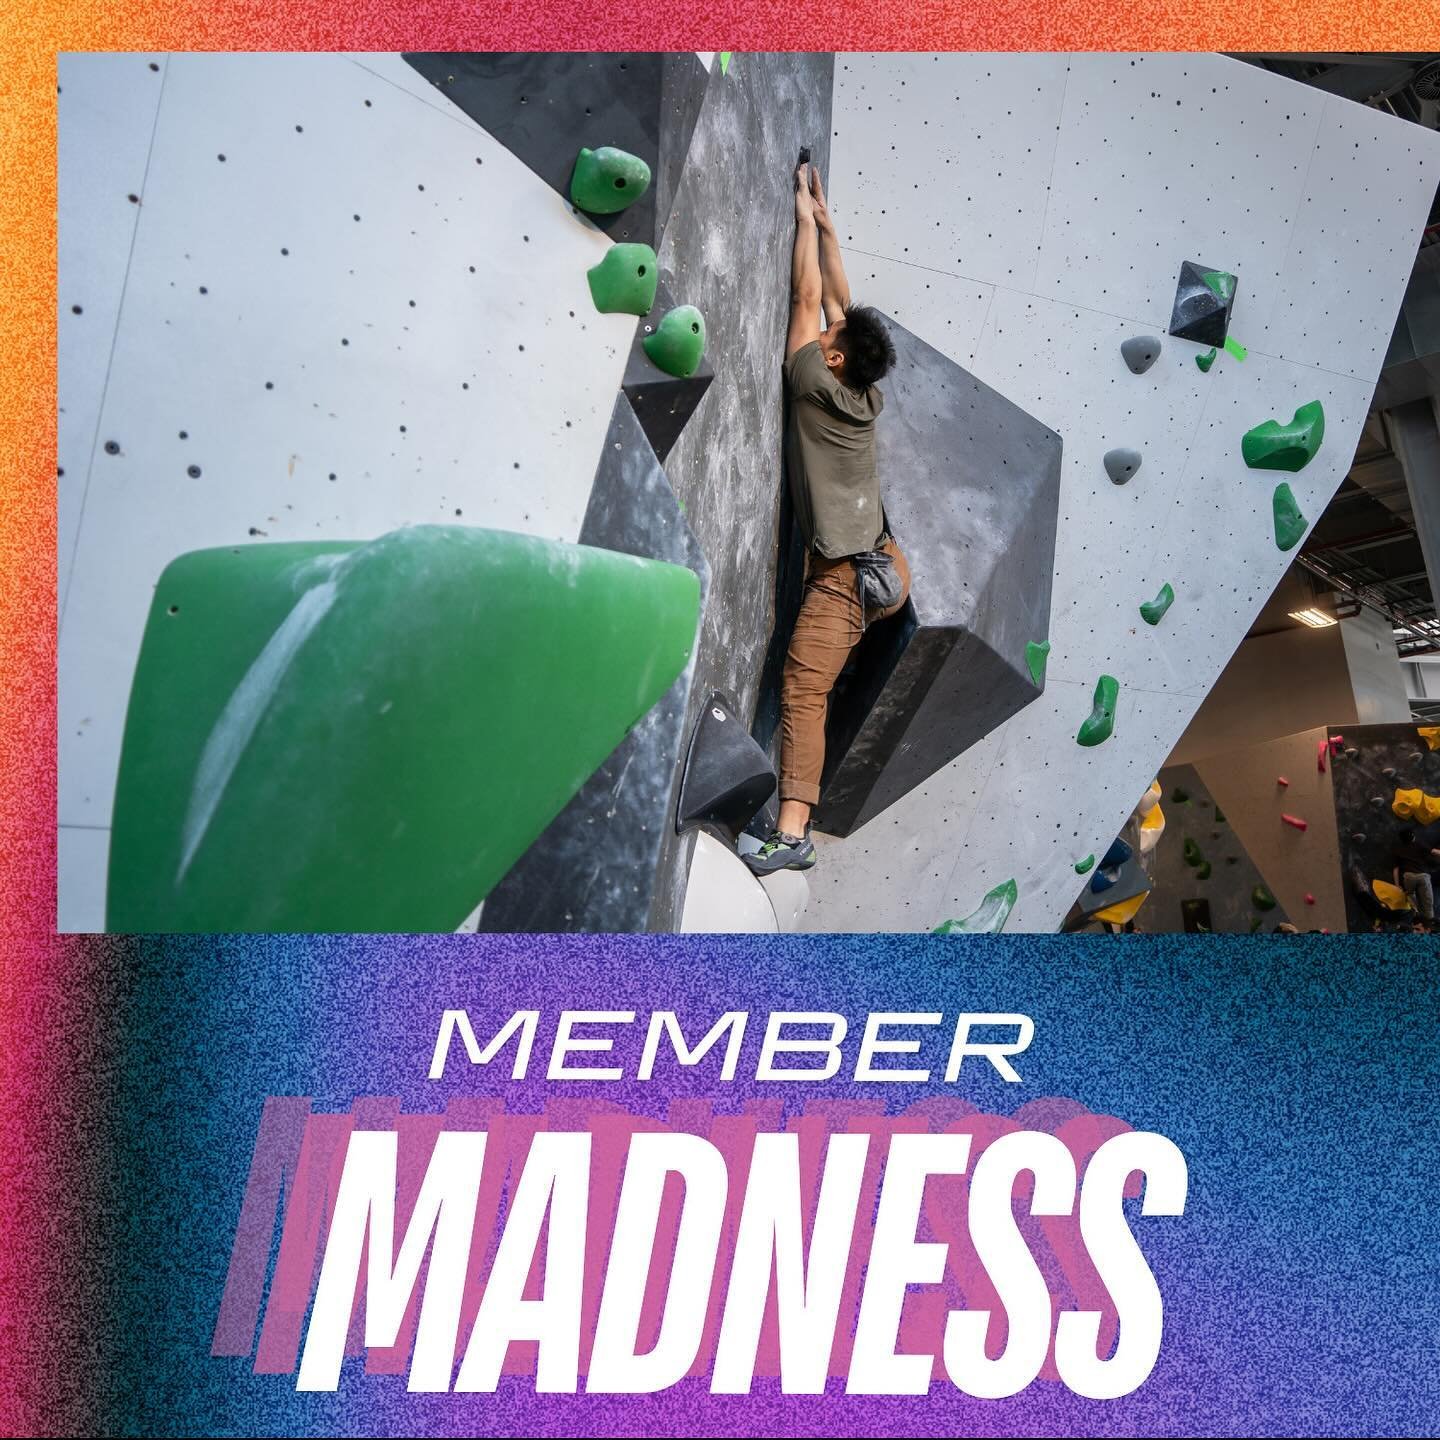 Feeling all the feels after an epic Member Madness event to celebrate our 3rd birthday! 🎉🎂 So grateful for our amazing community who made it all possible. Here&rsquo;s to many more years of sending, sweating, and smiling together! 🫶

We want to gi